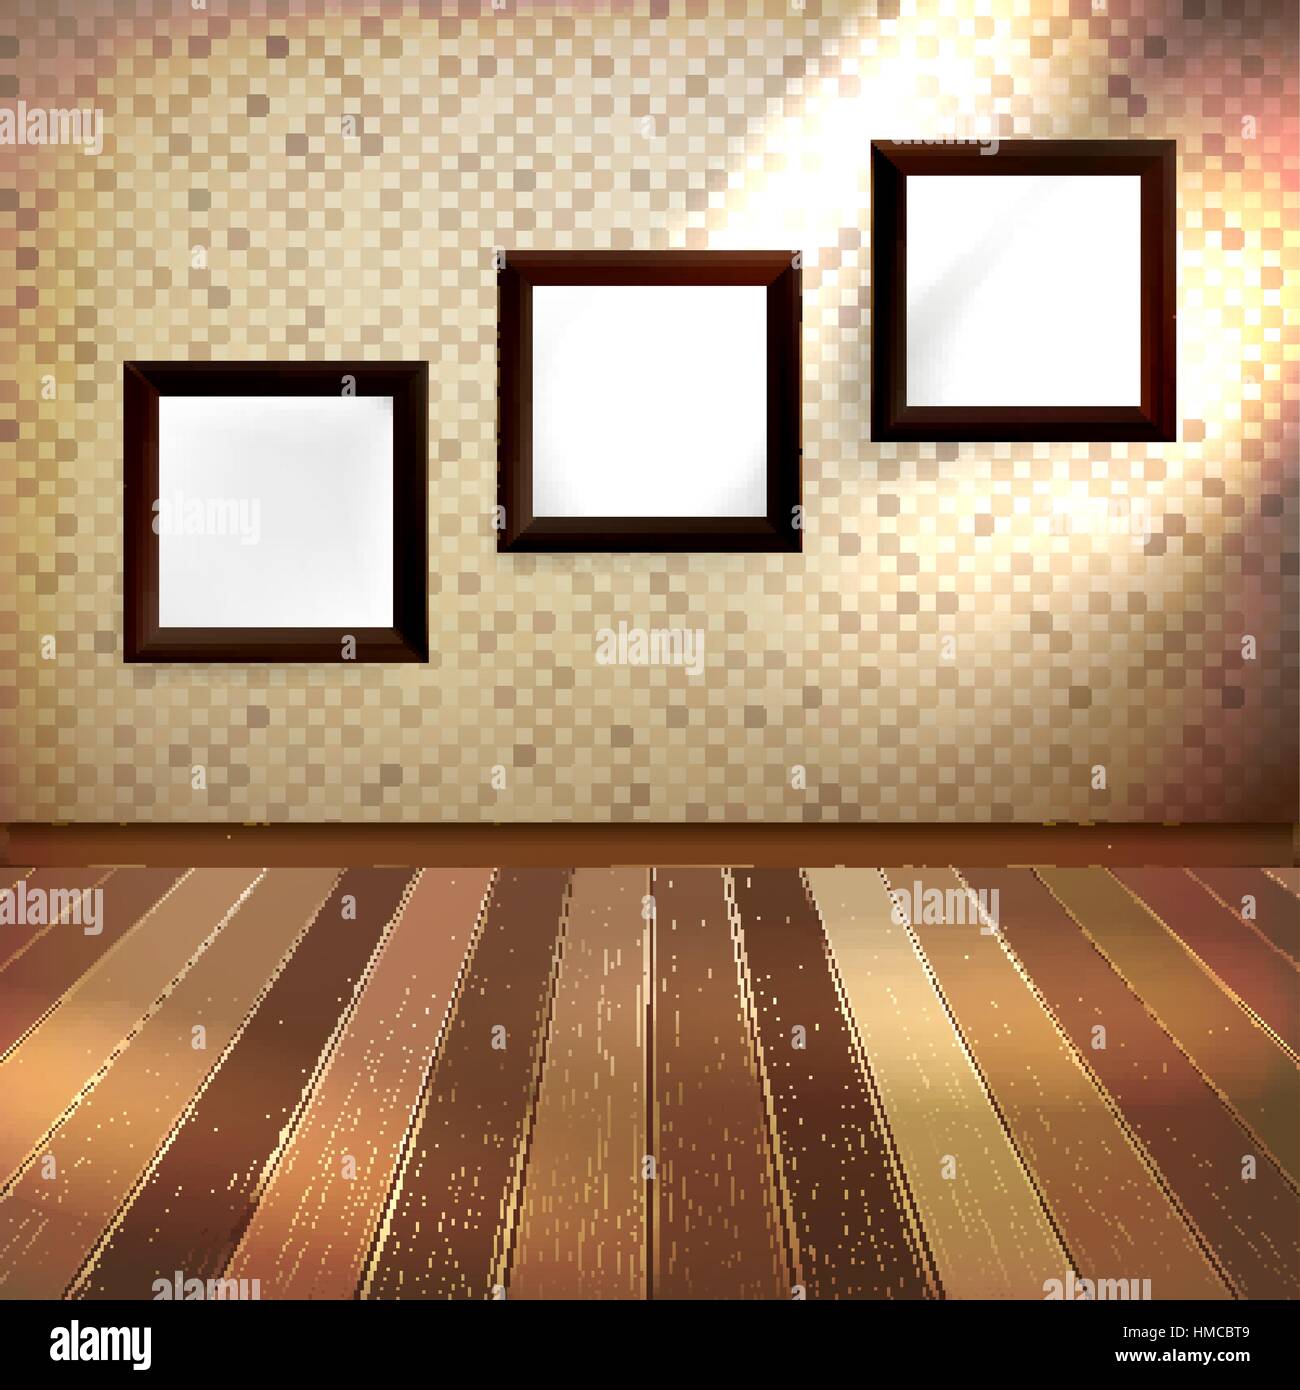 Retro room with three frames for pictures on the wall. EPS 10 vector Stock Vector